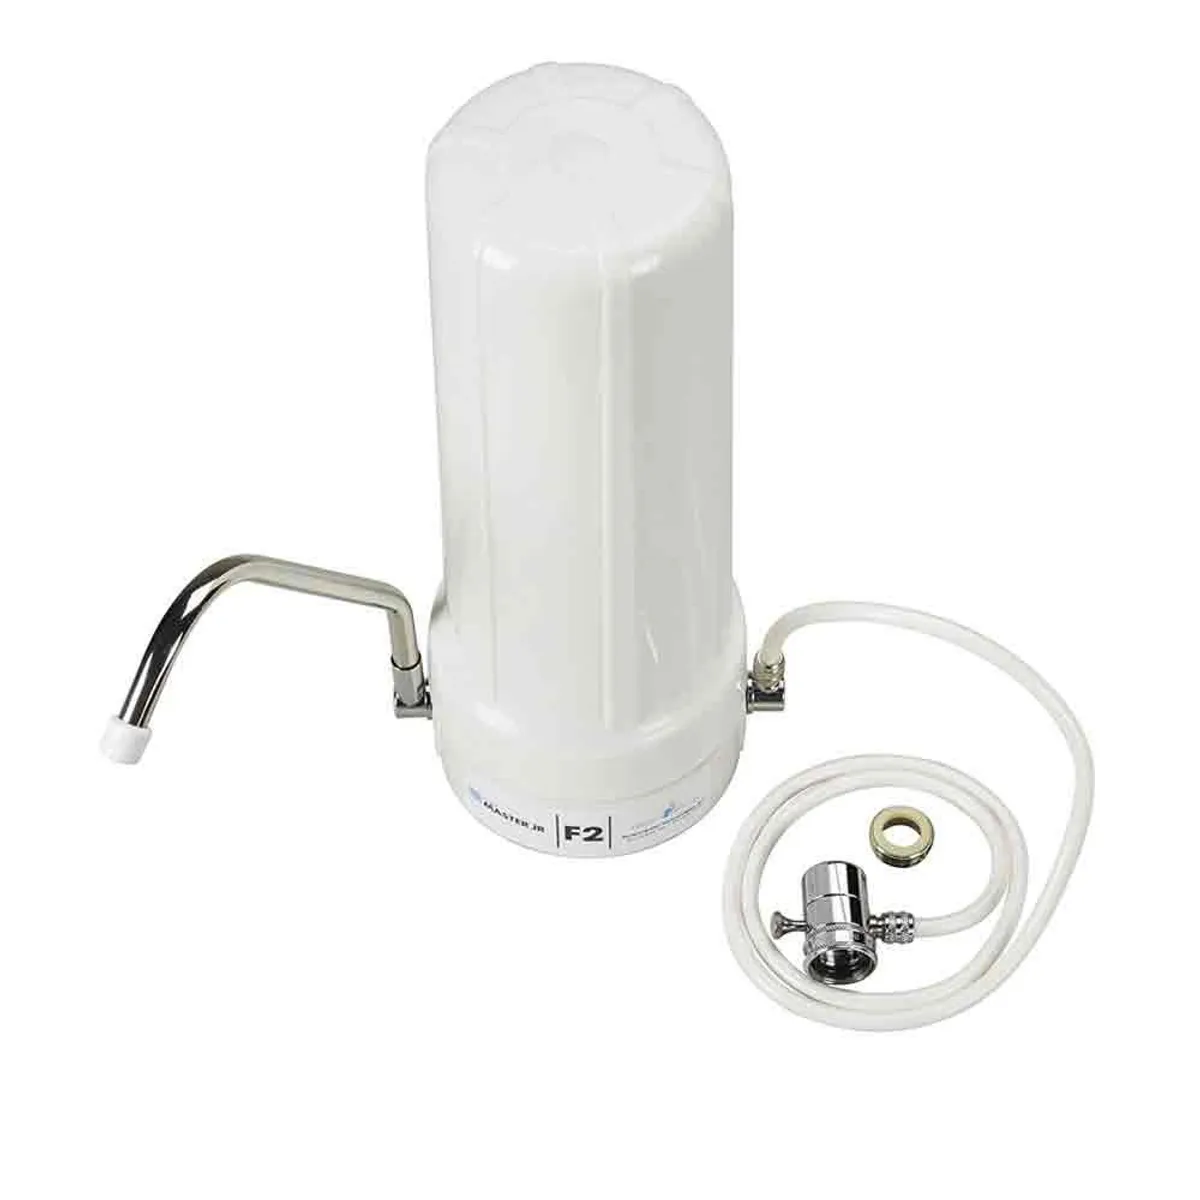 Home Master TMJRF2E Sink Top Water Filter Review